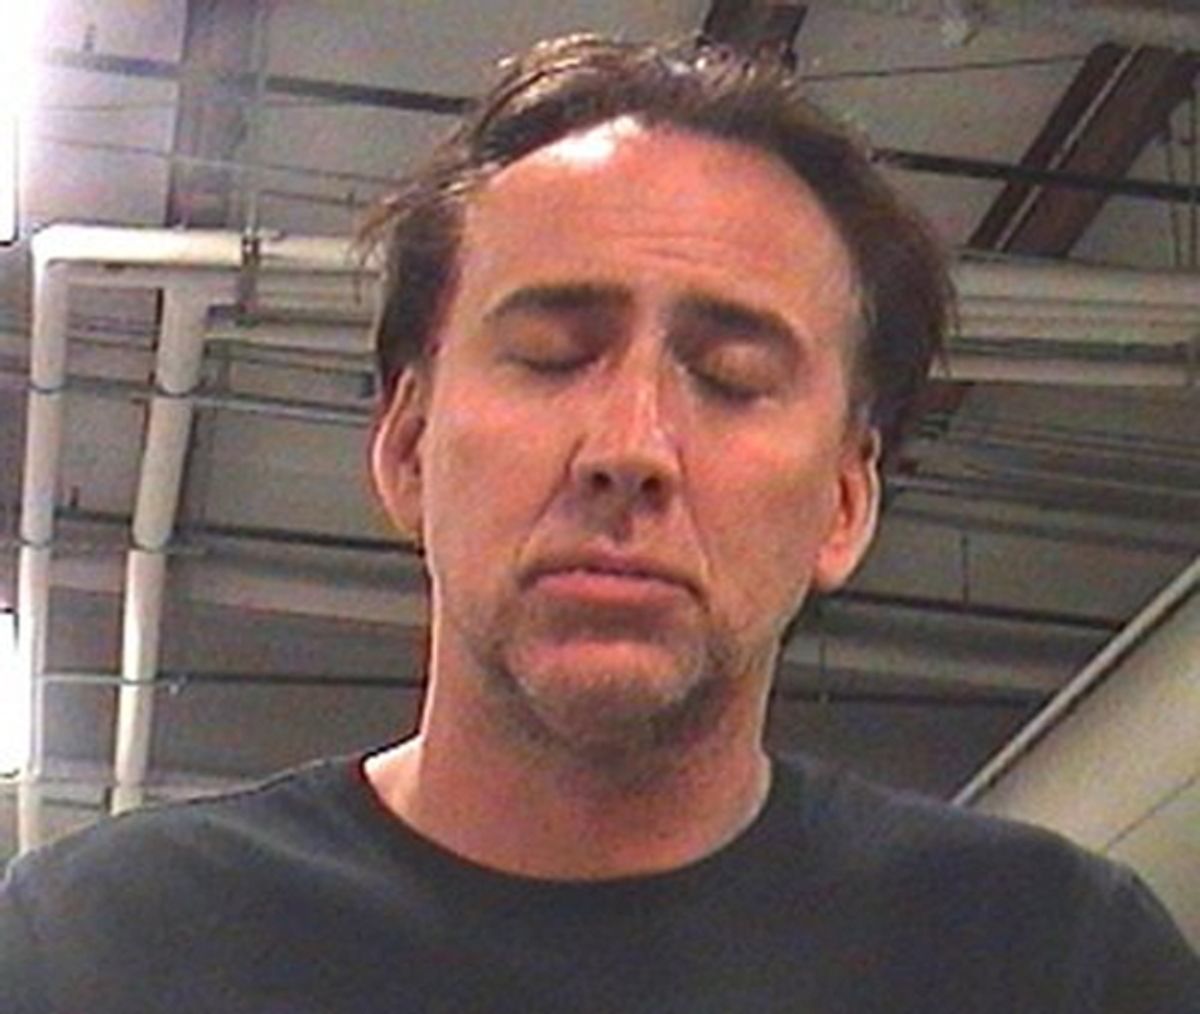 Nicolas Cage's mugshot from this weekend's arrest in New Orleans 